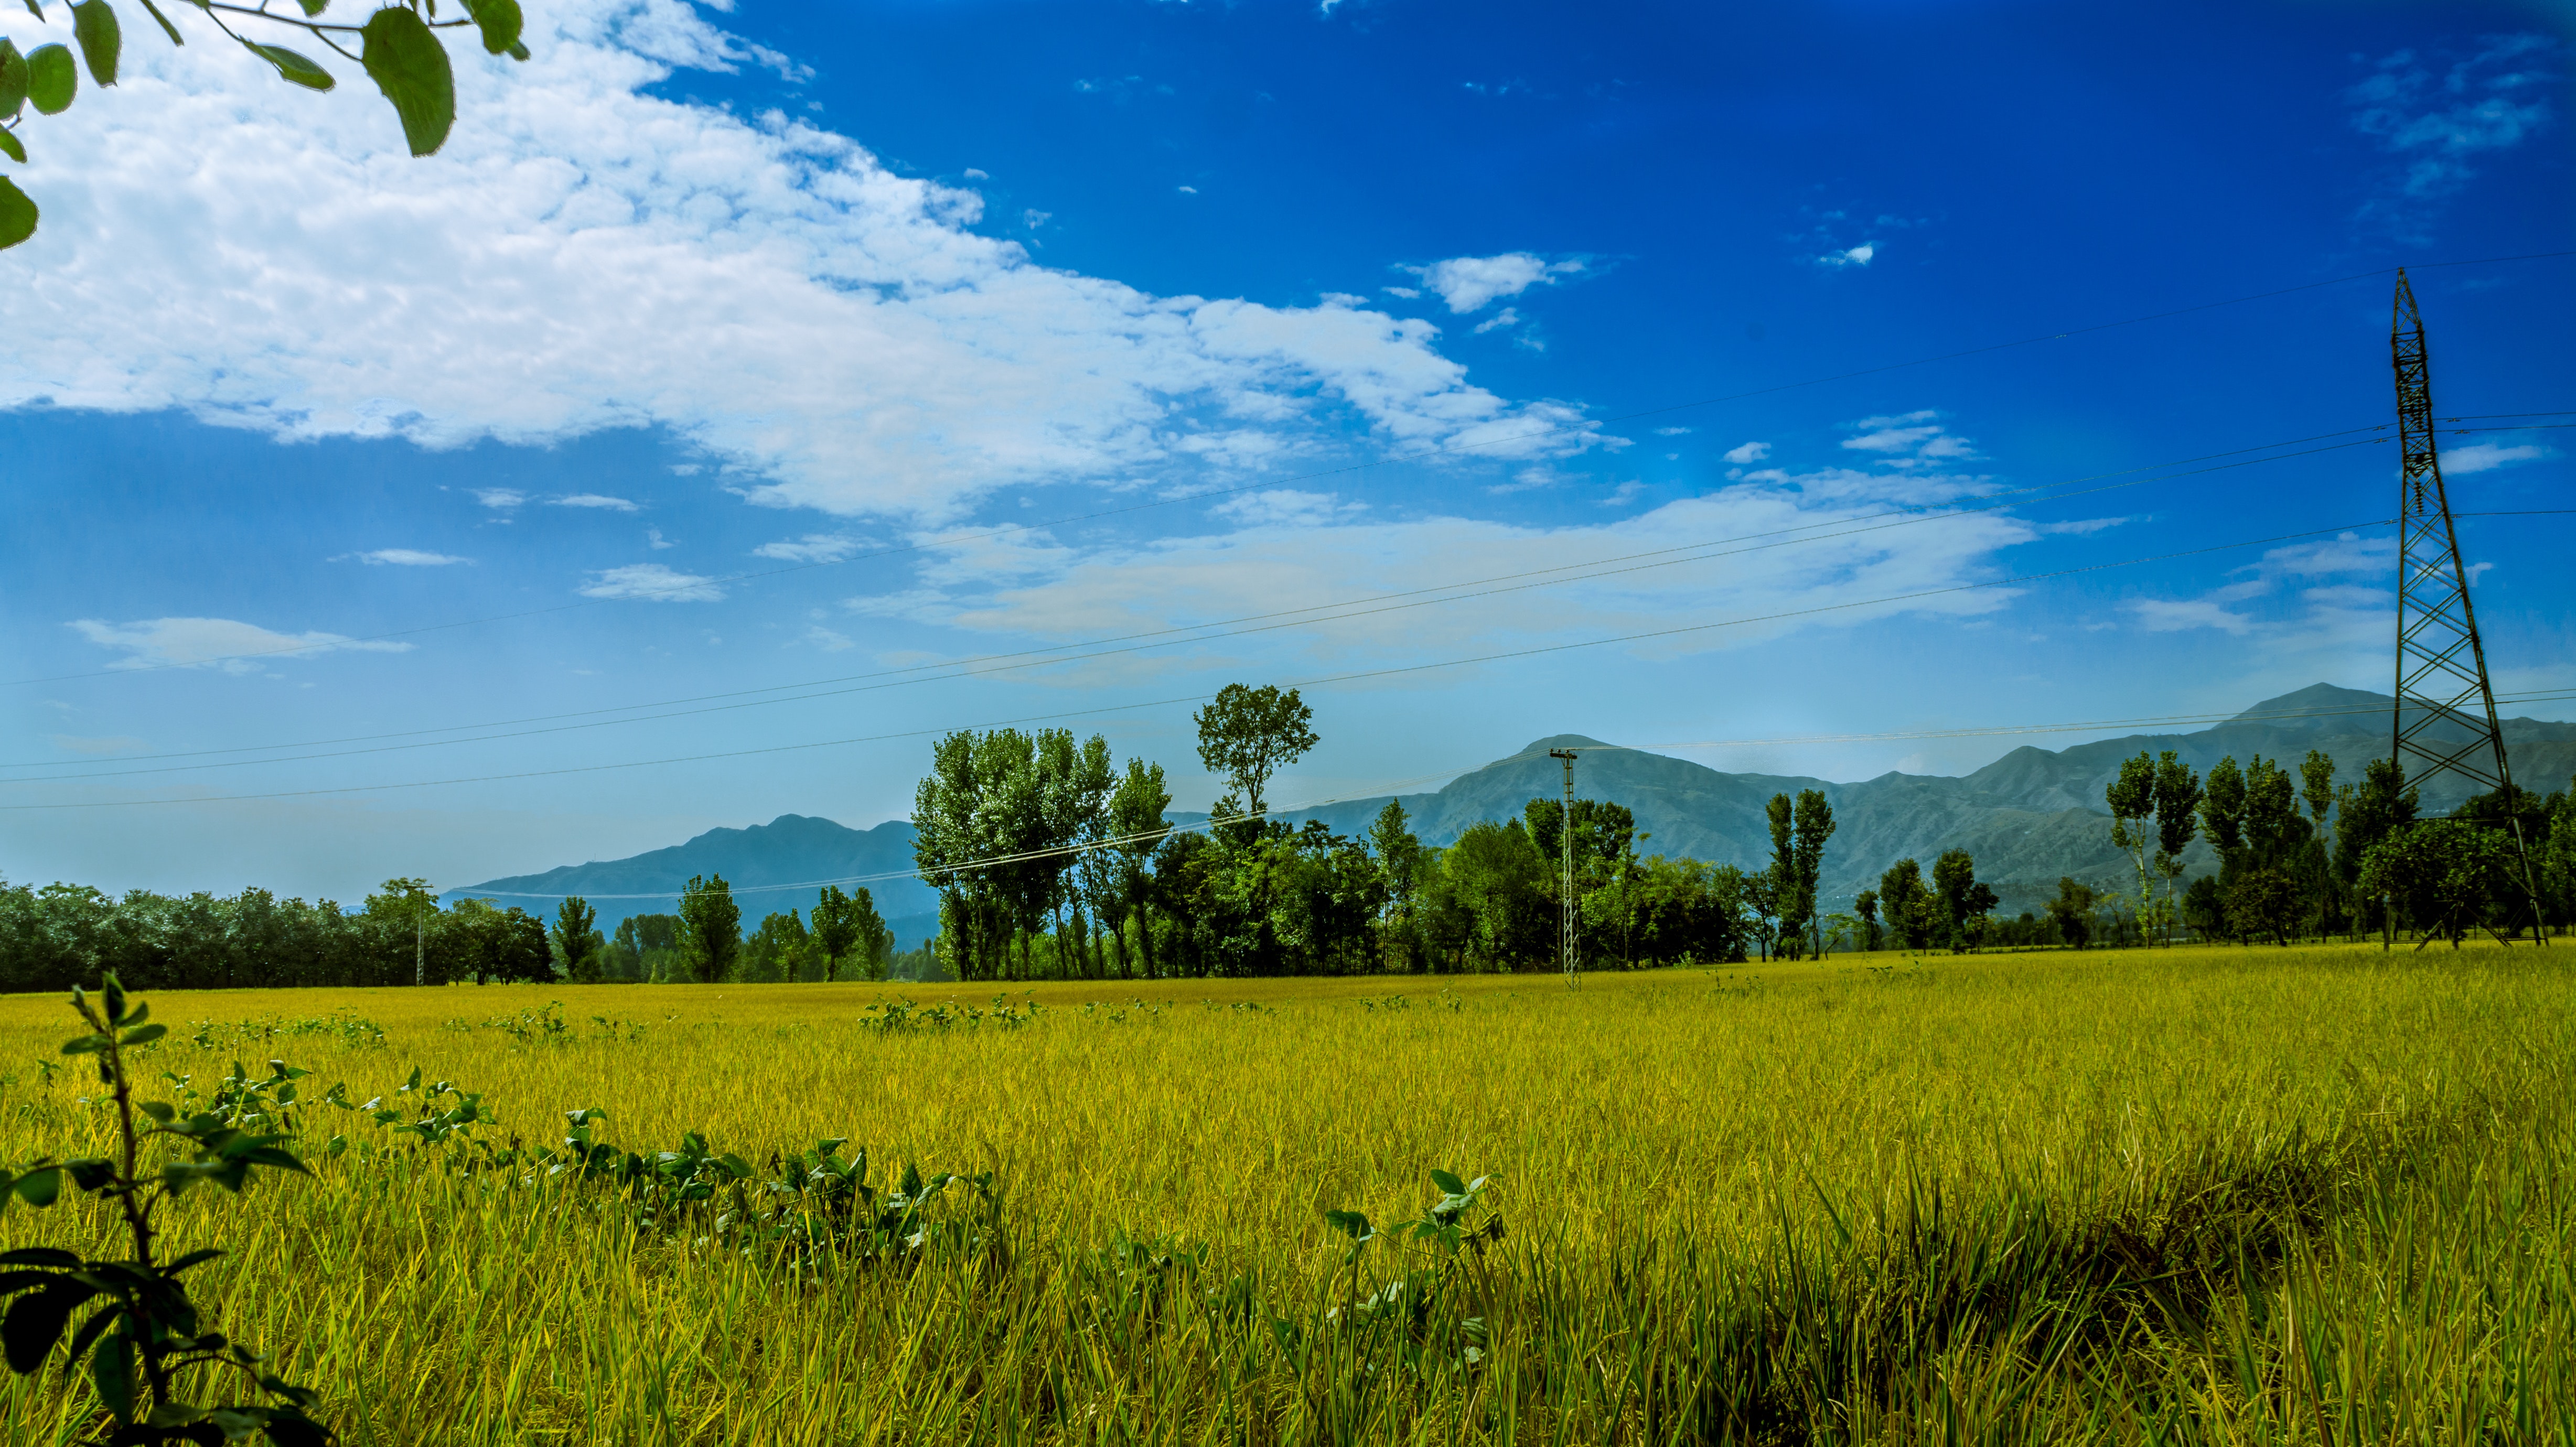 Green rice field surrounded by trees under clear blue sky photo